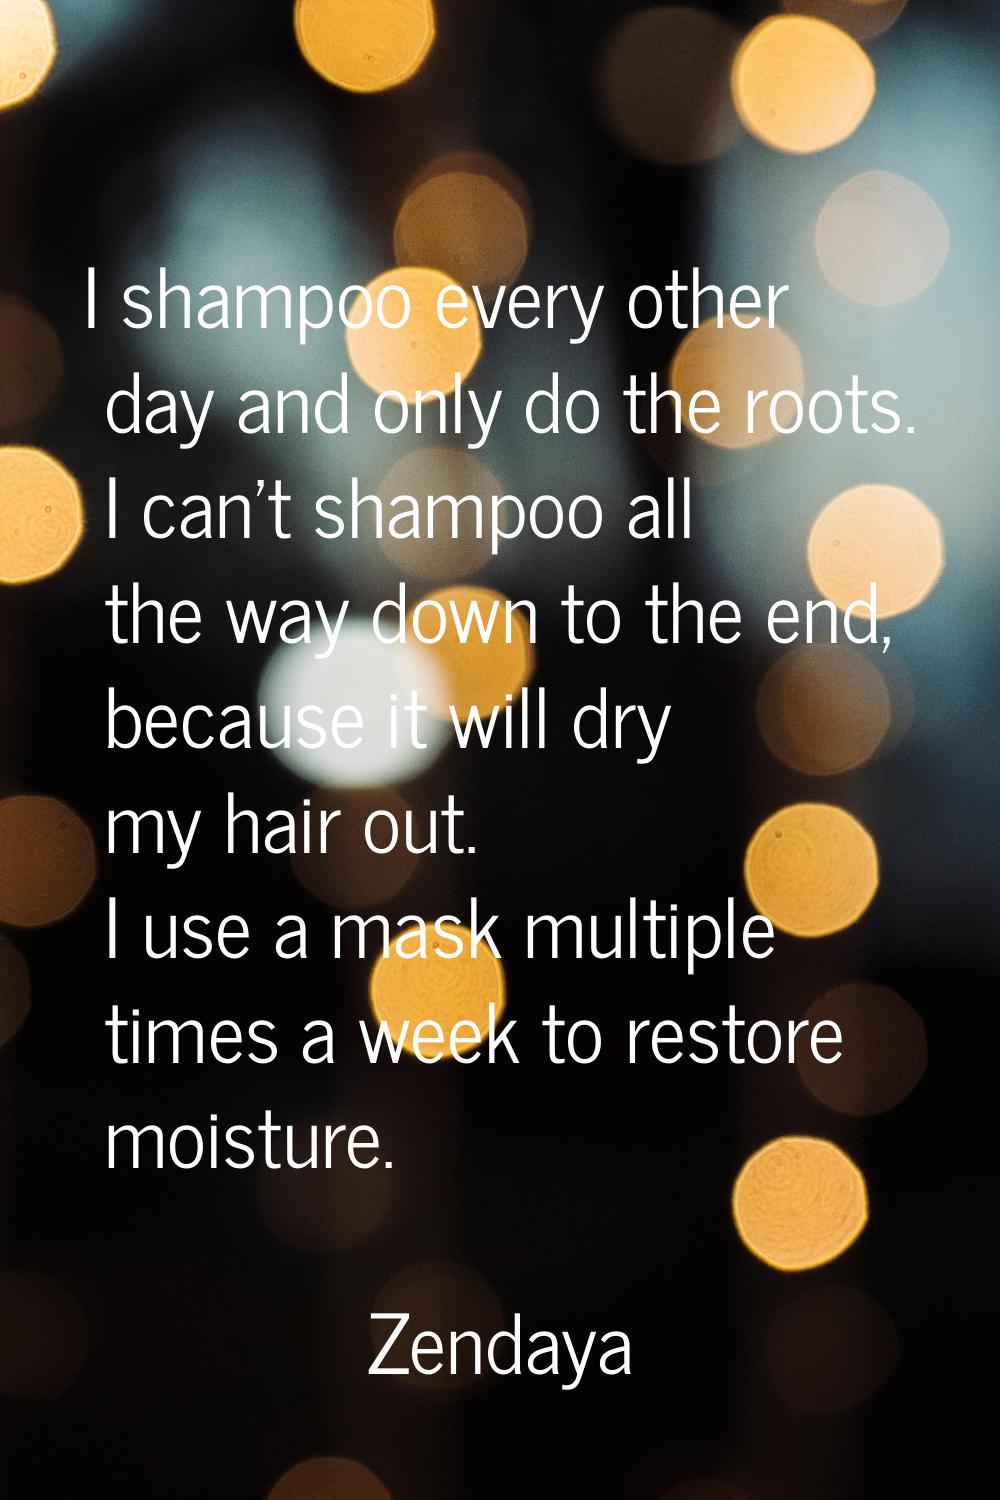 I shampoo every other day and only do the roots. I can't shampoo all the way down to the end, becau